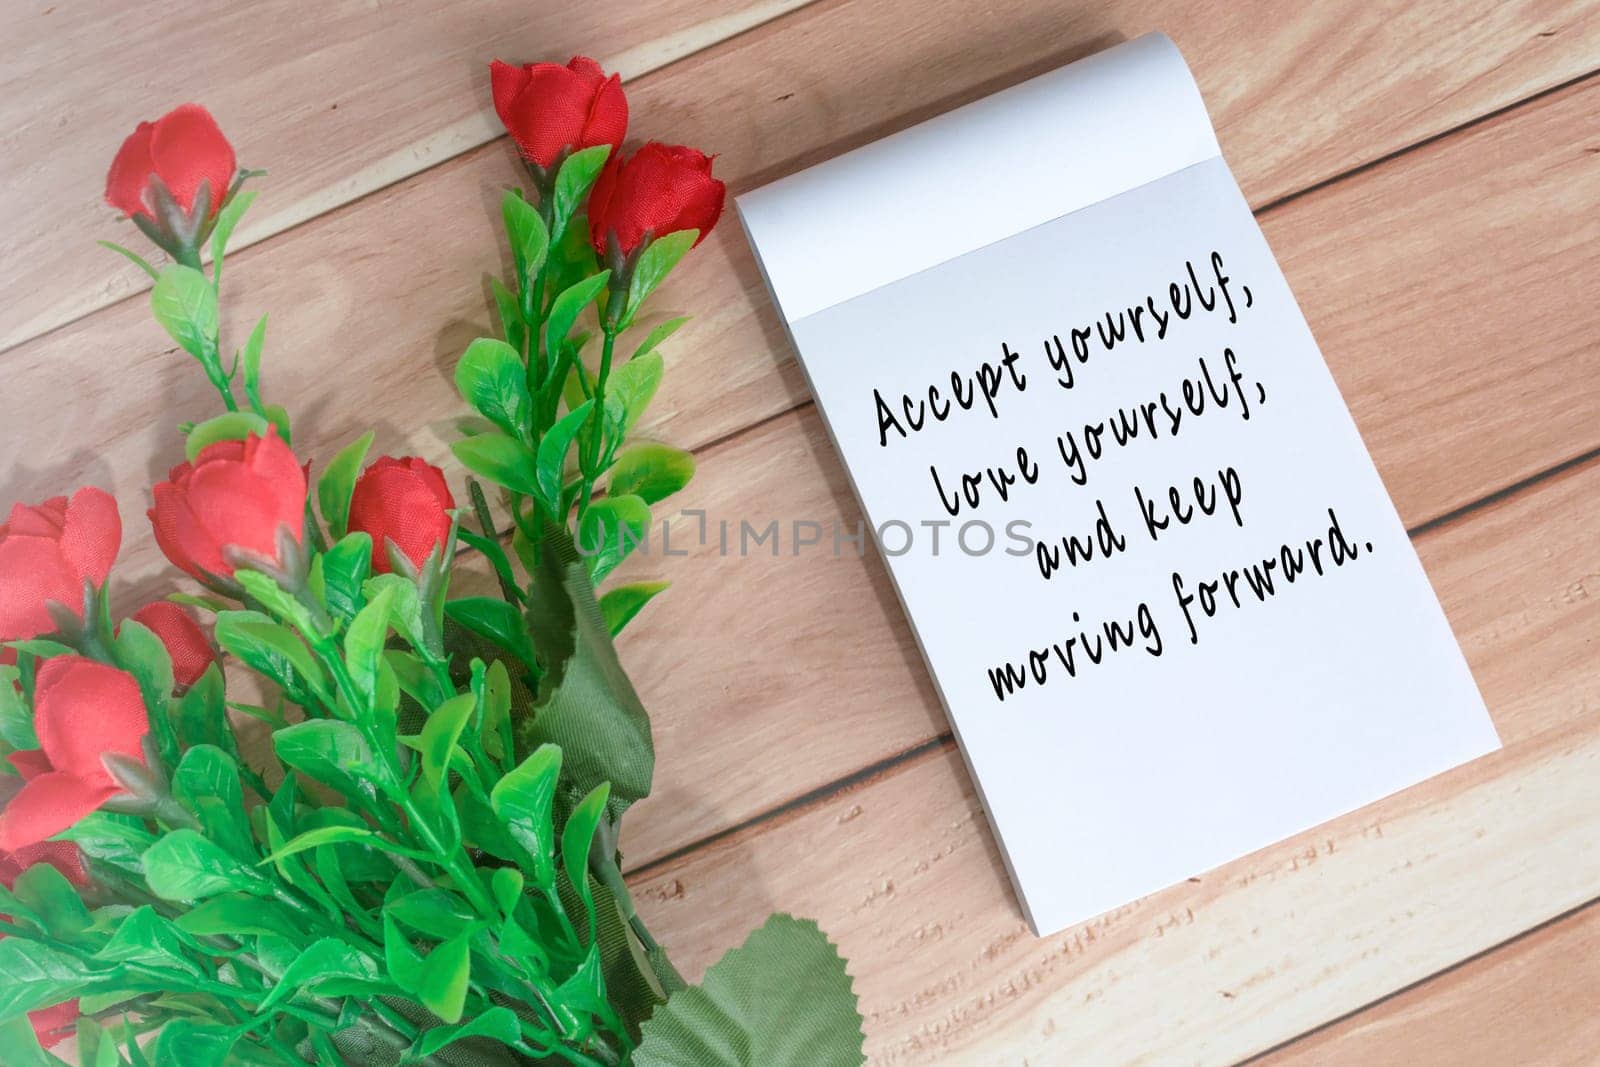 Motivational quote written on note book with artificial flowers on wooden desk by JennMiranda